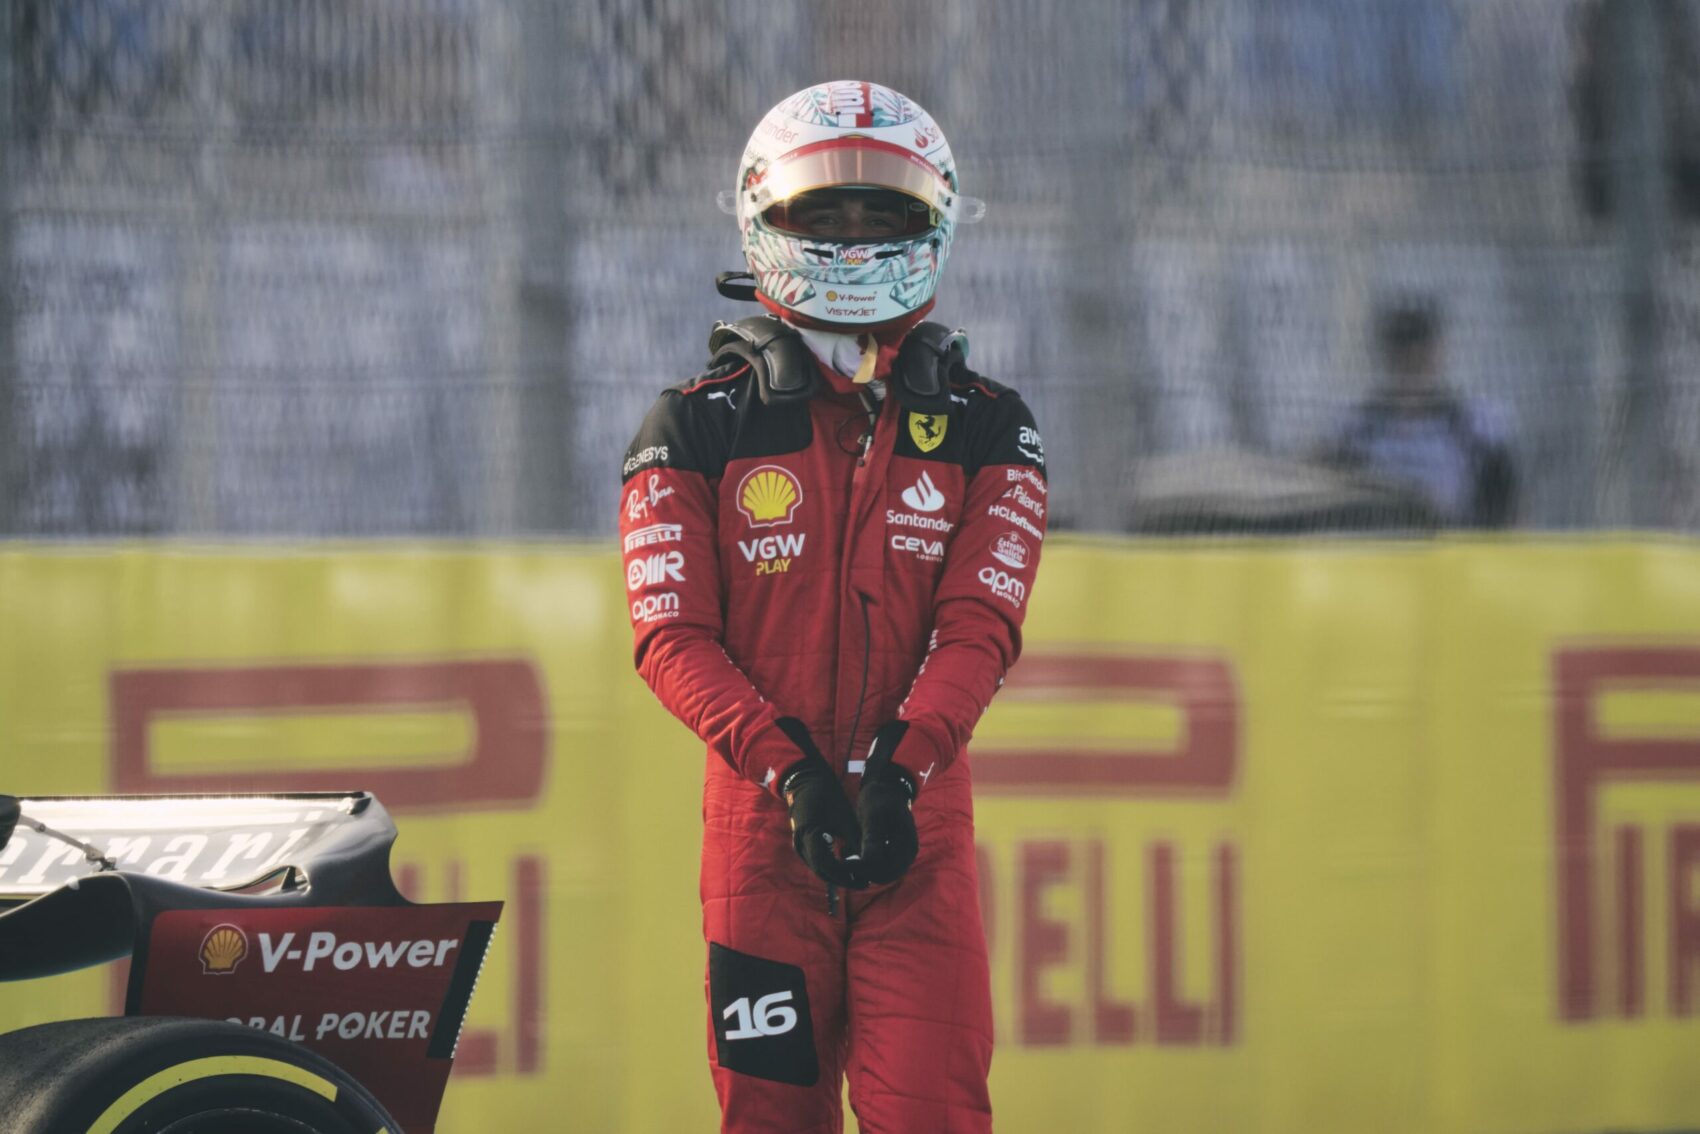 Leclerc already knew after the first laps that Ferrari would struggle